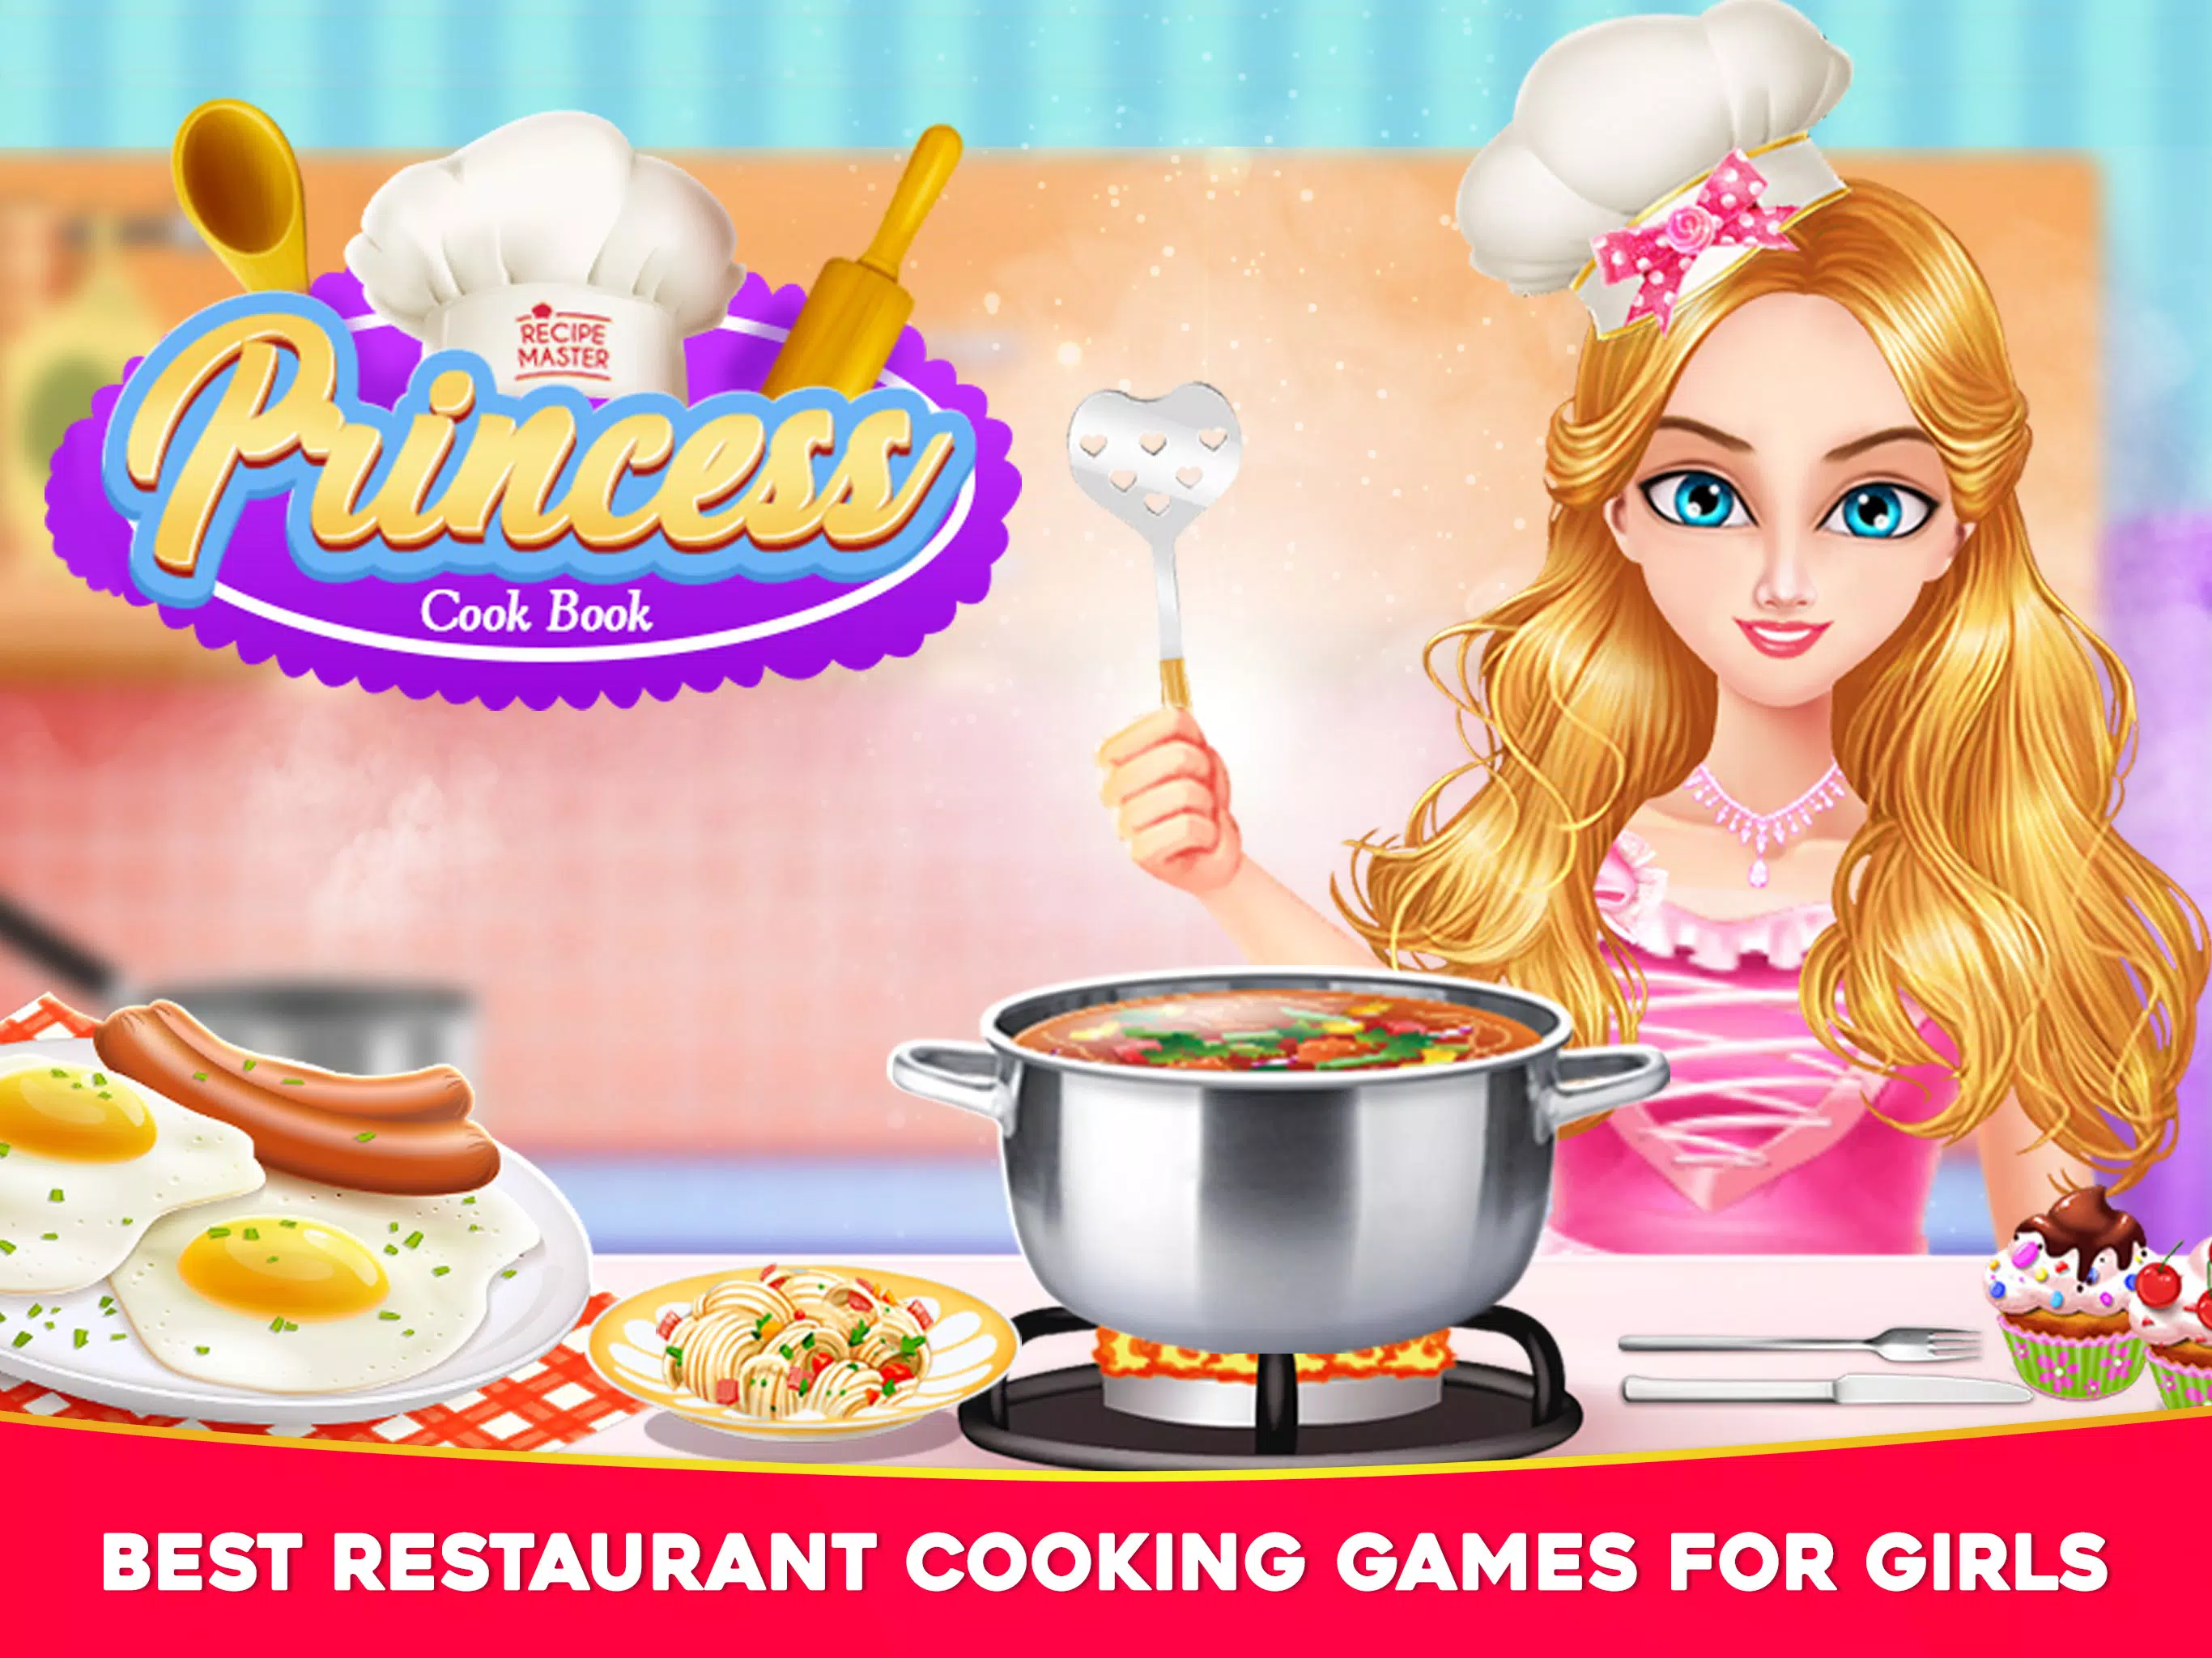 Princess Cook Book - Master Chef Cooking Games for Android - APK Download